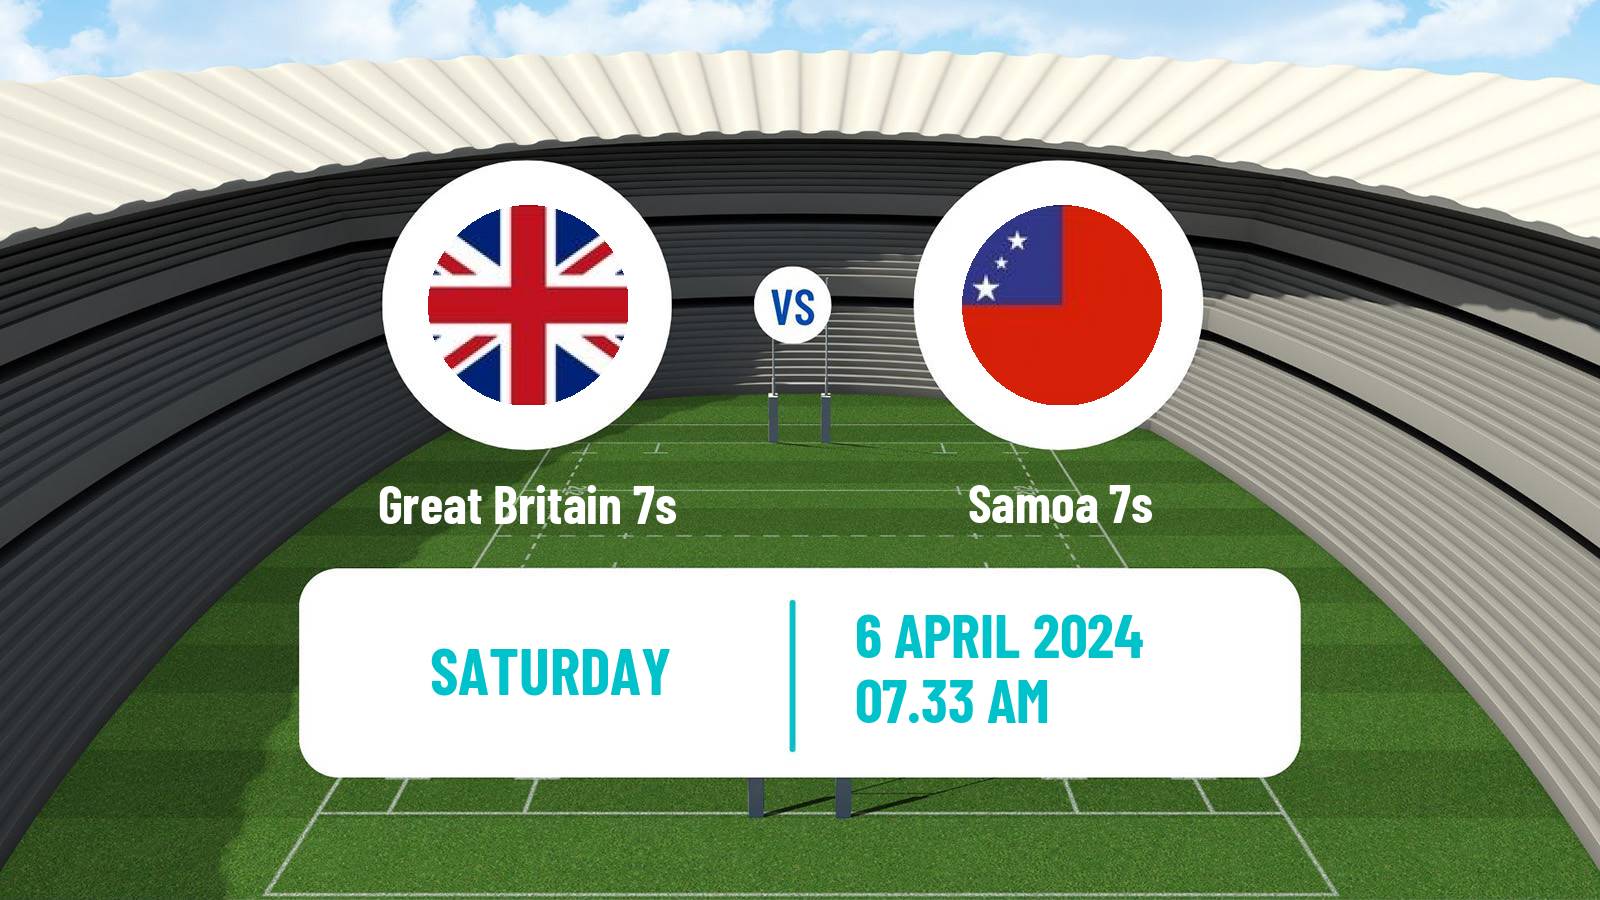 Rugby union Sevens World Series - Hong Kong Great Britain 7s - Samoa 7s